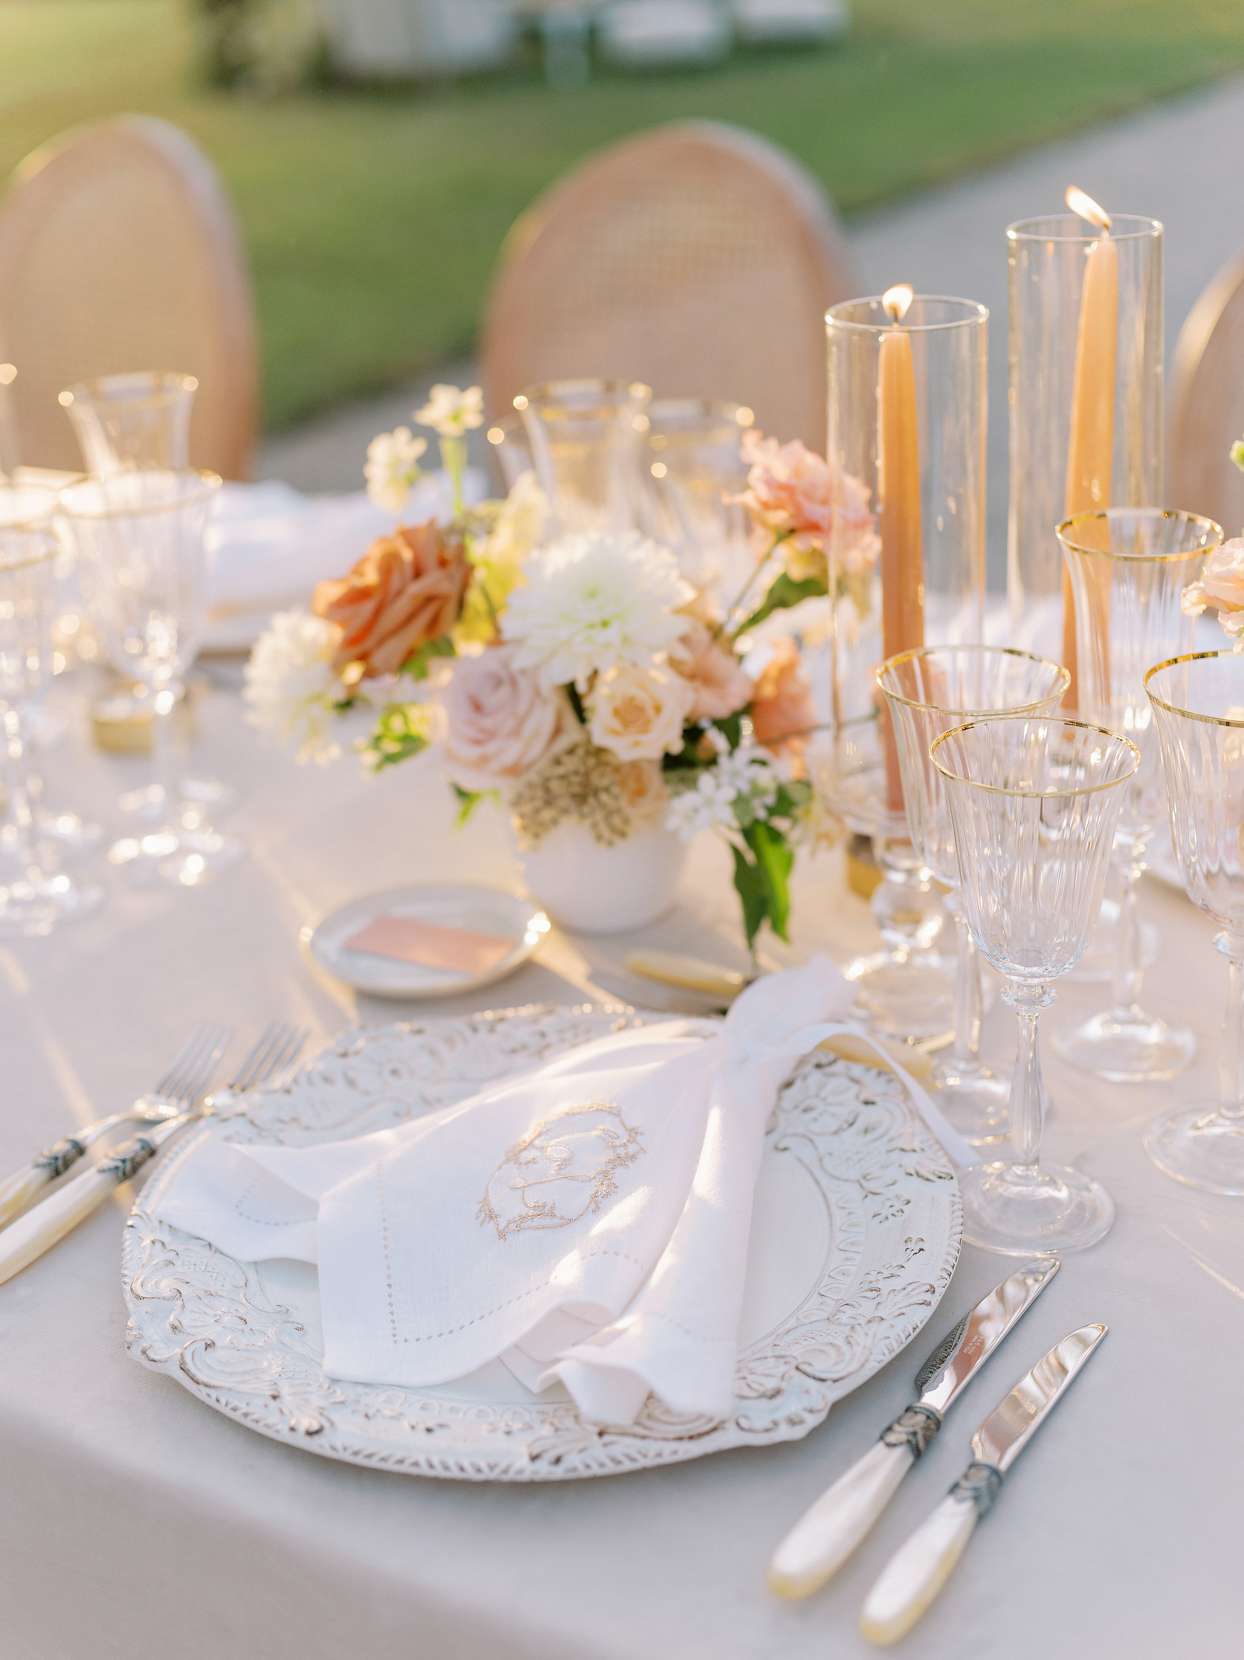 white and cream colored place settings